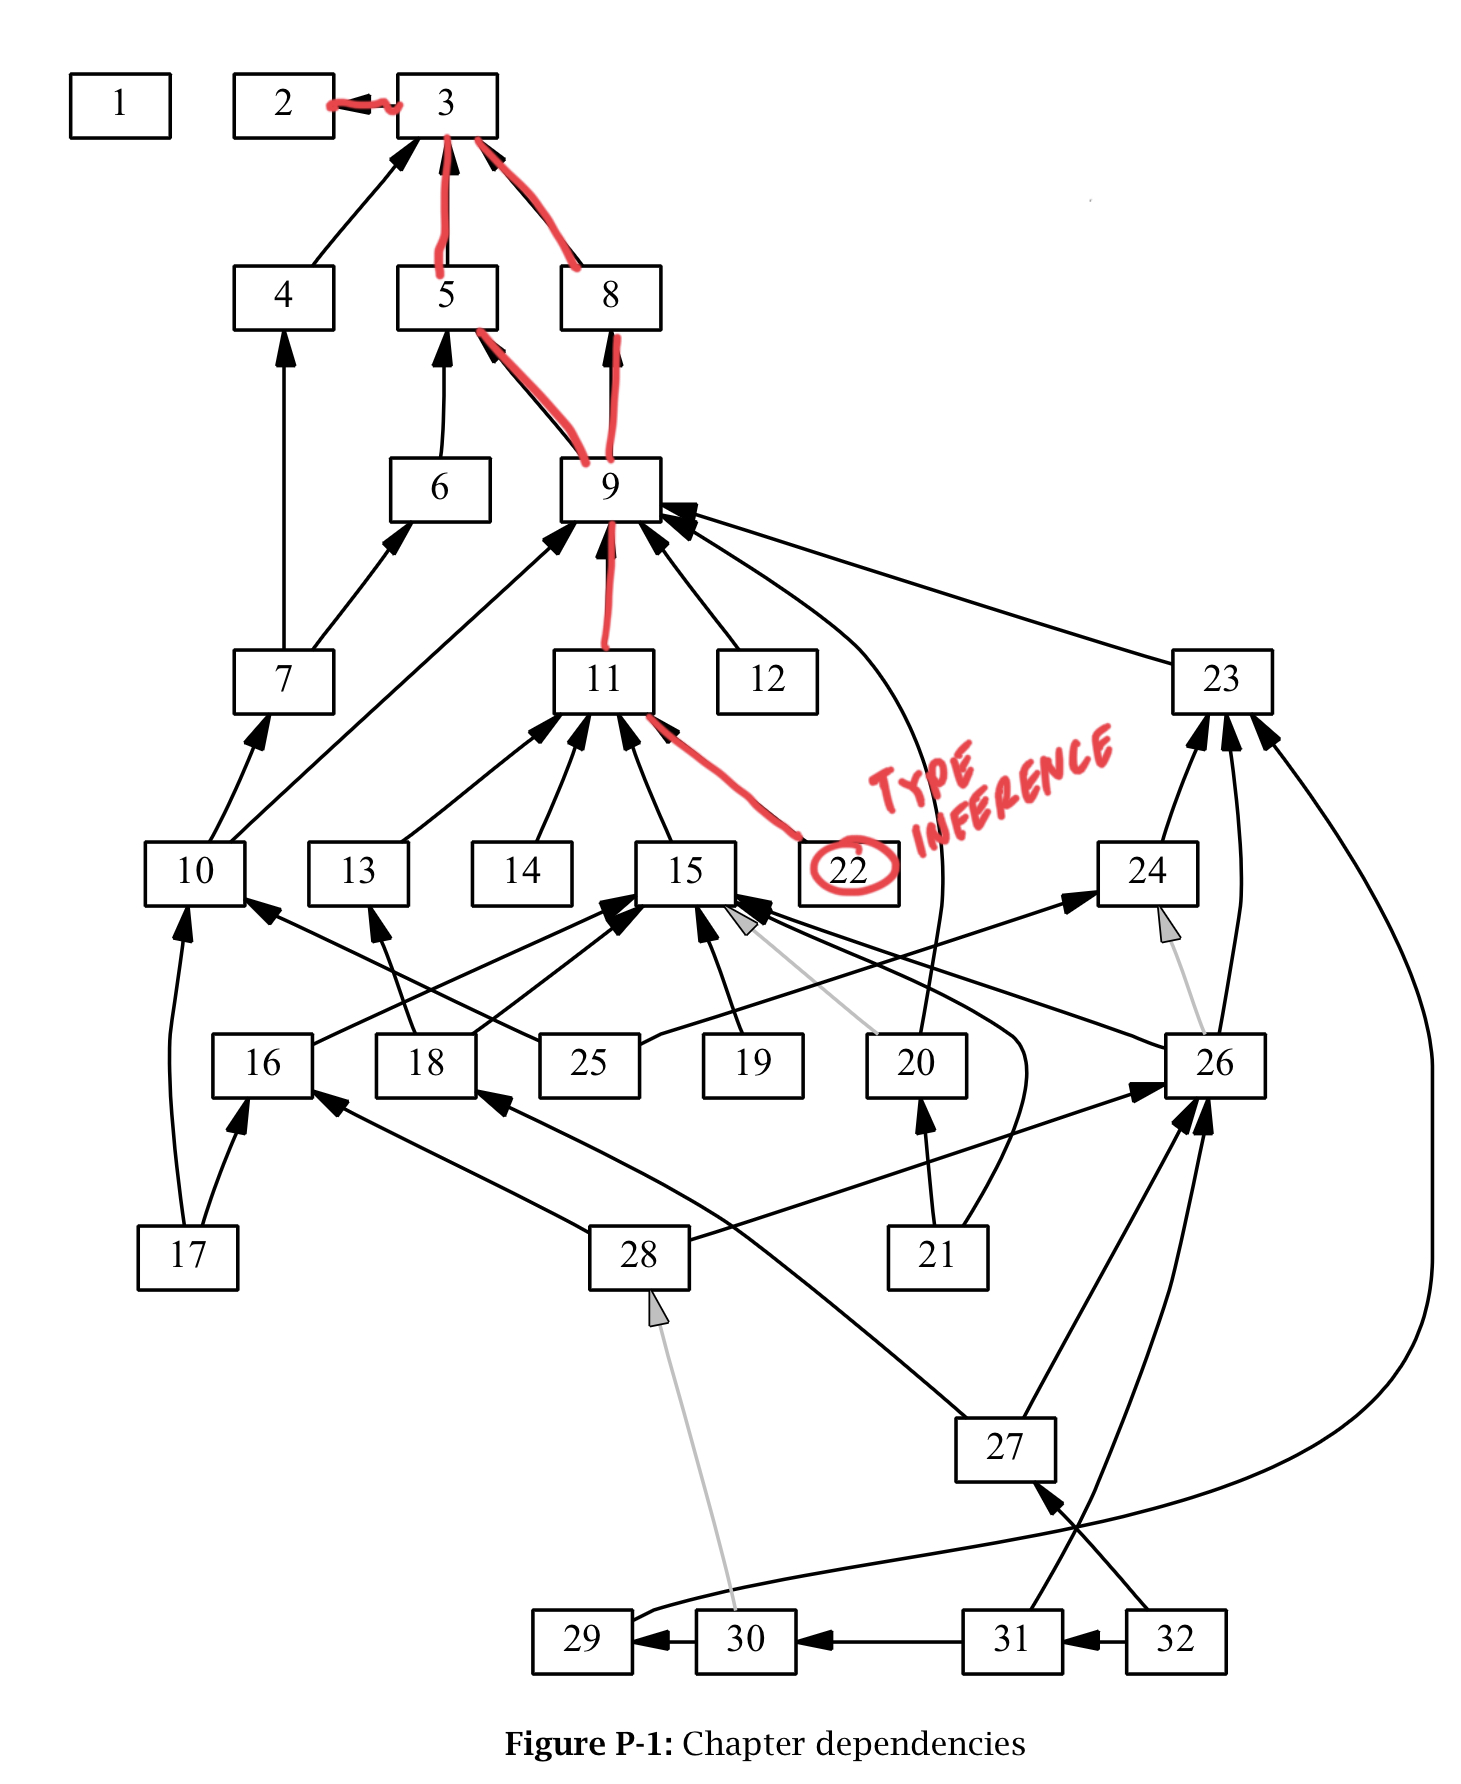 TAPL's chapter dependency graph